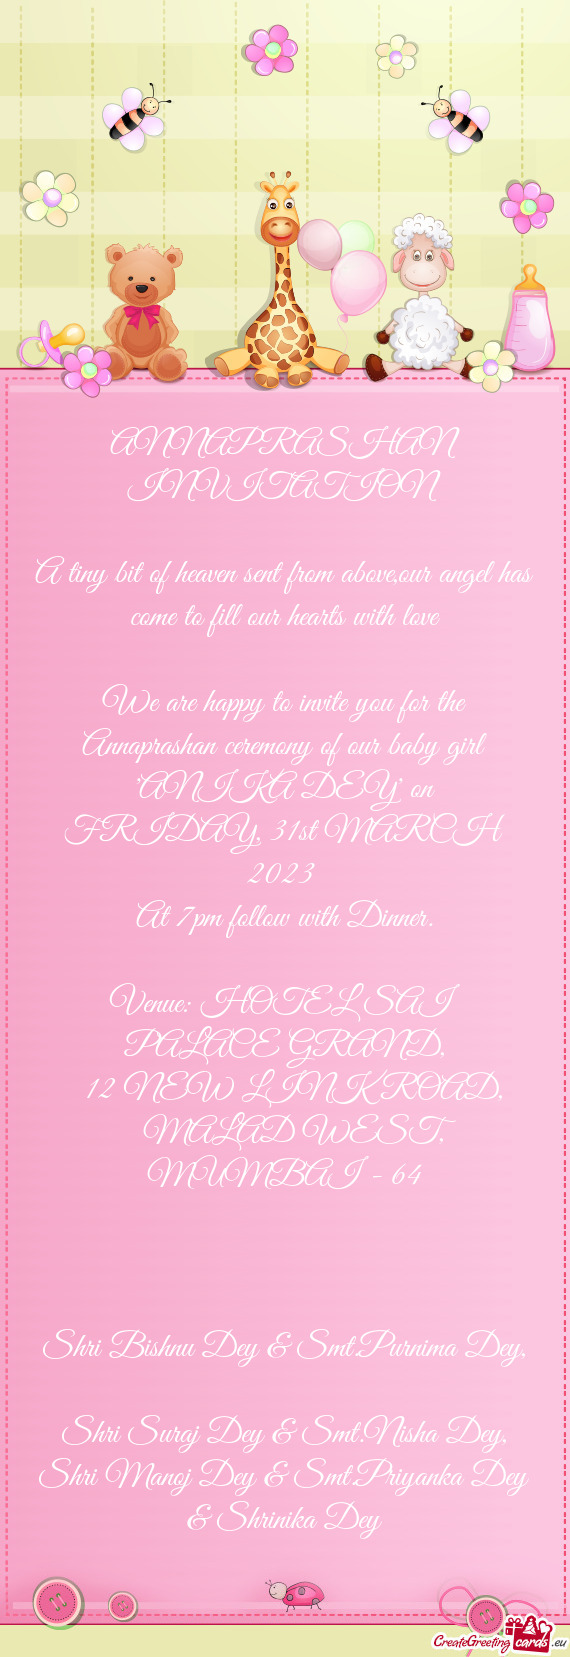 We are happy to invite you for the Annaprashan ceremony of our baby girl 